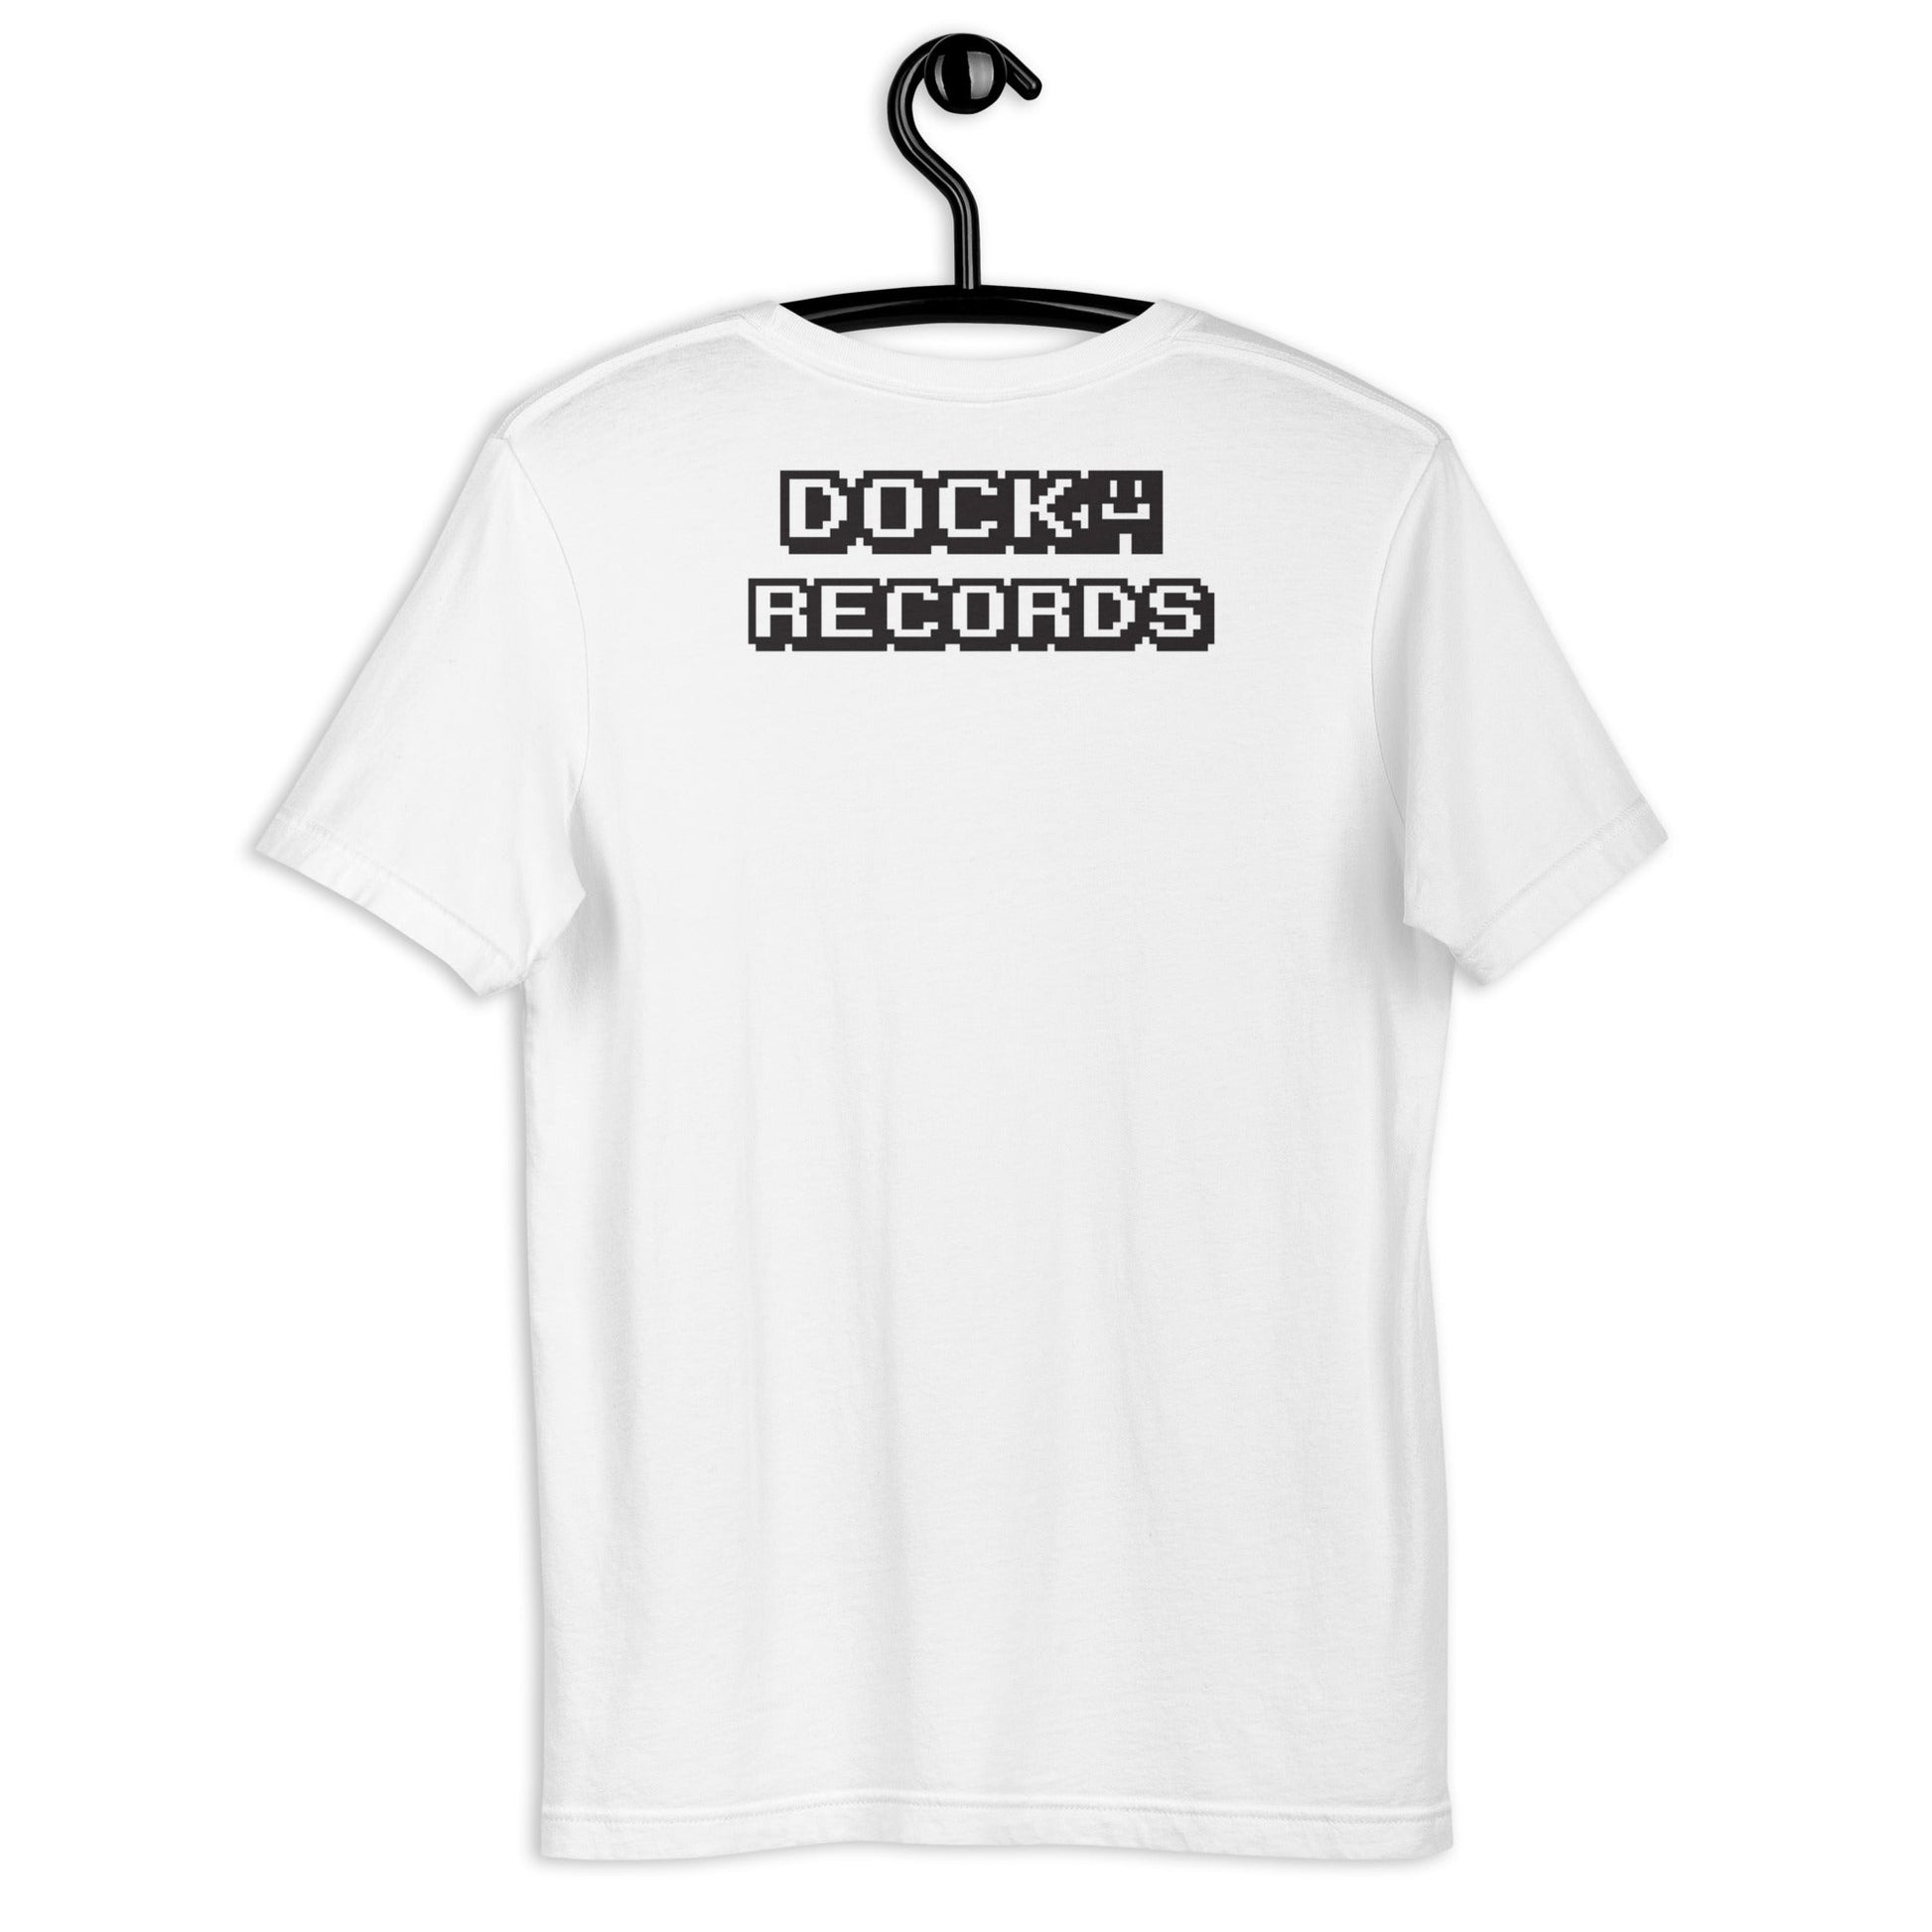 Docka Records Farris Wheel Special Unisex T-shirt - BeExtra! Apparel & More